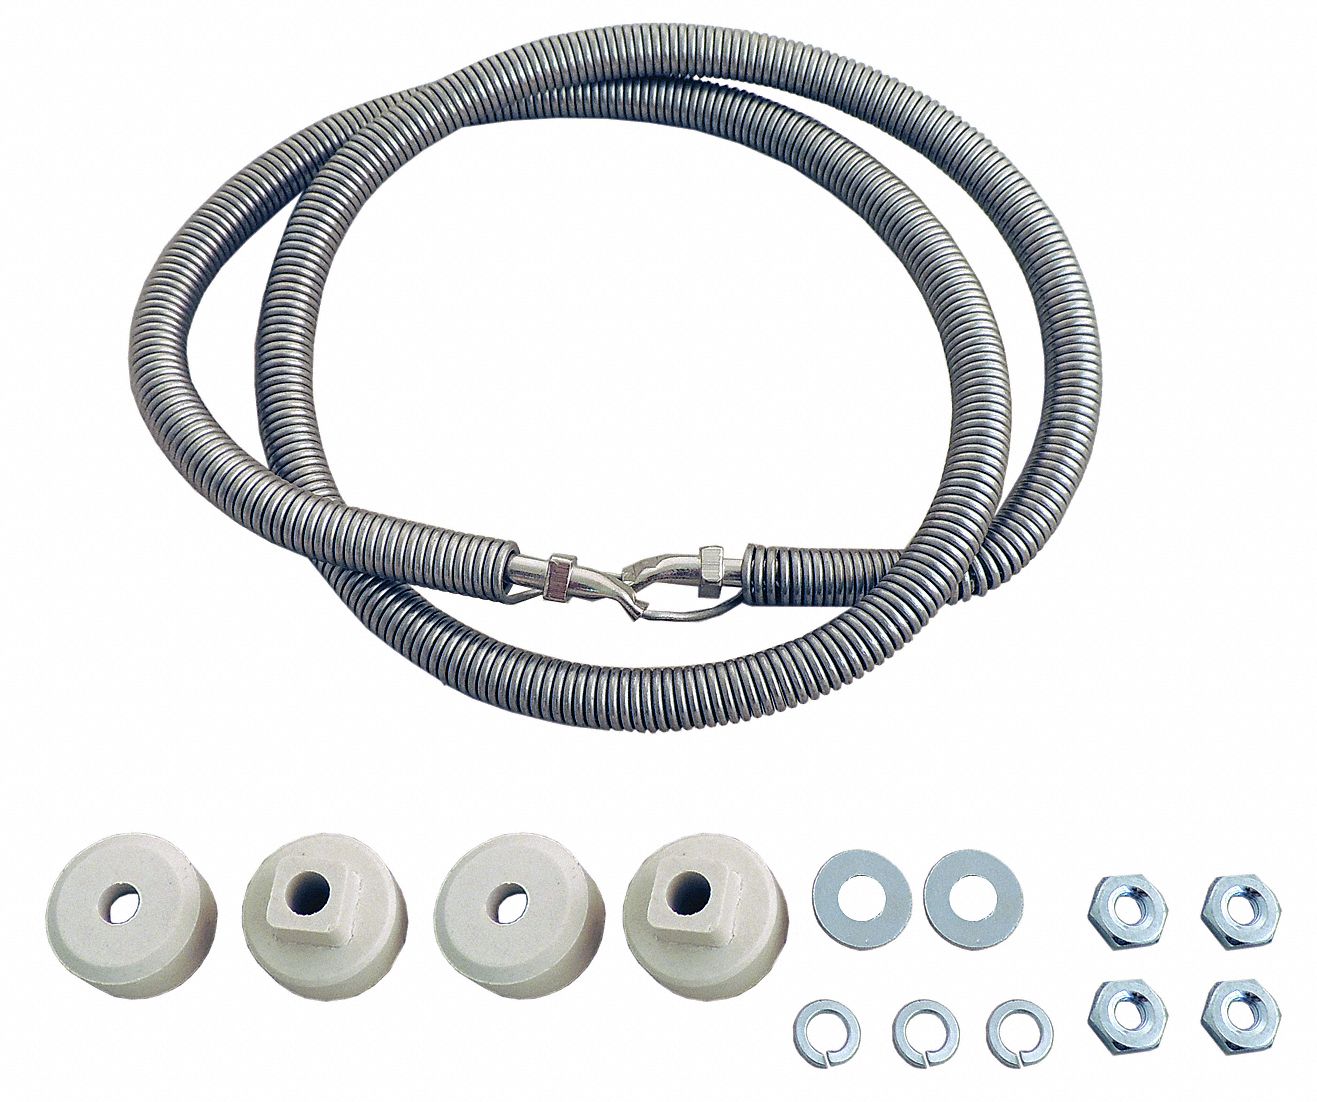 SUPCO Electric Heater Coil ReString Kit 2 ft 7 1/2 in Coil Lg, 3/8 in